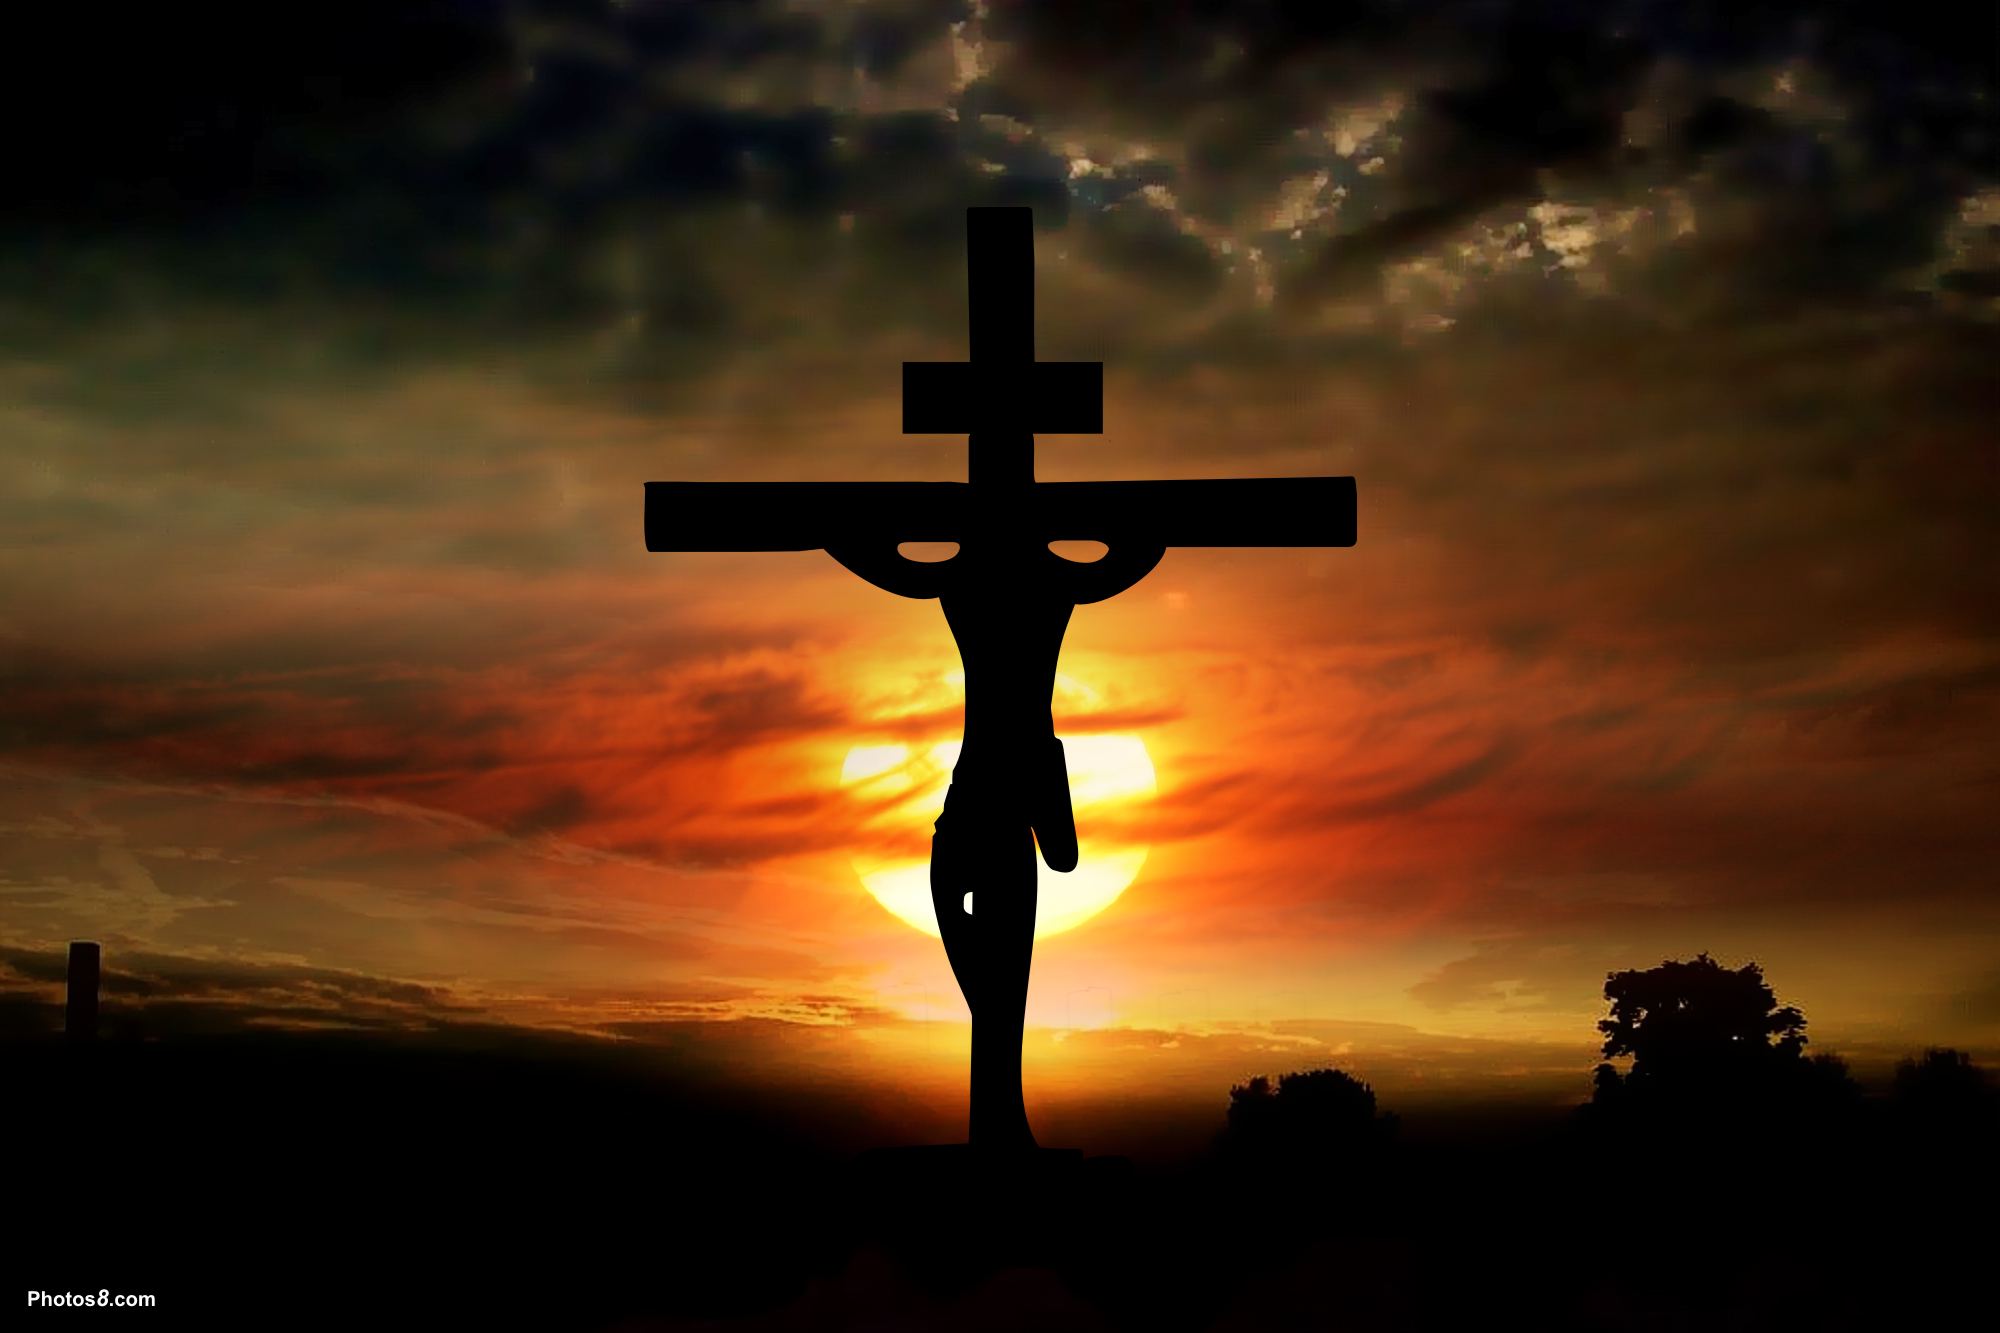 cross picture Cross images free download clip art on clipart jpg